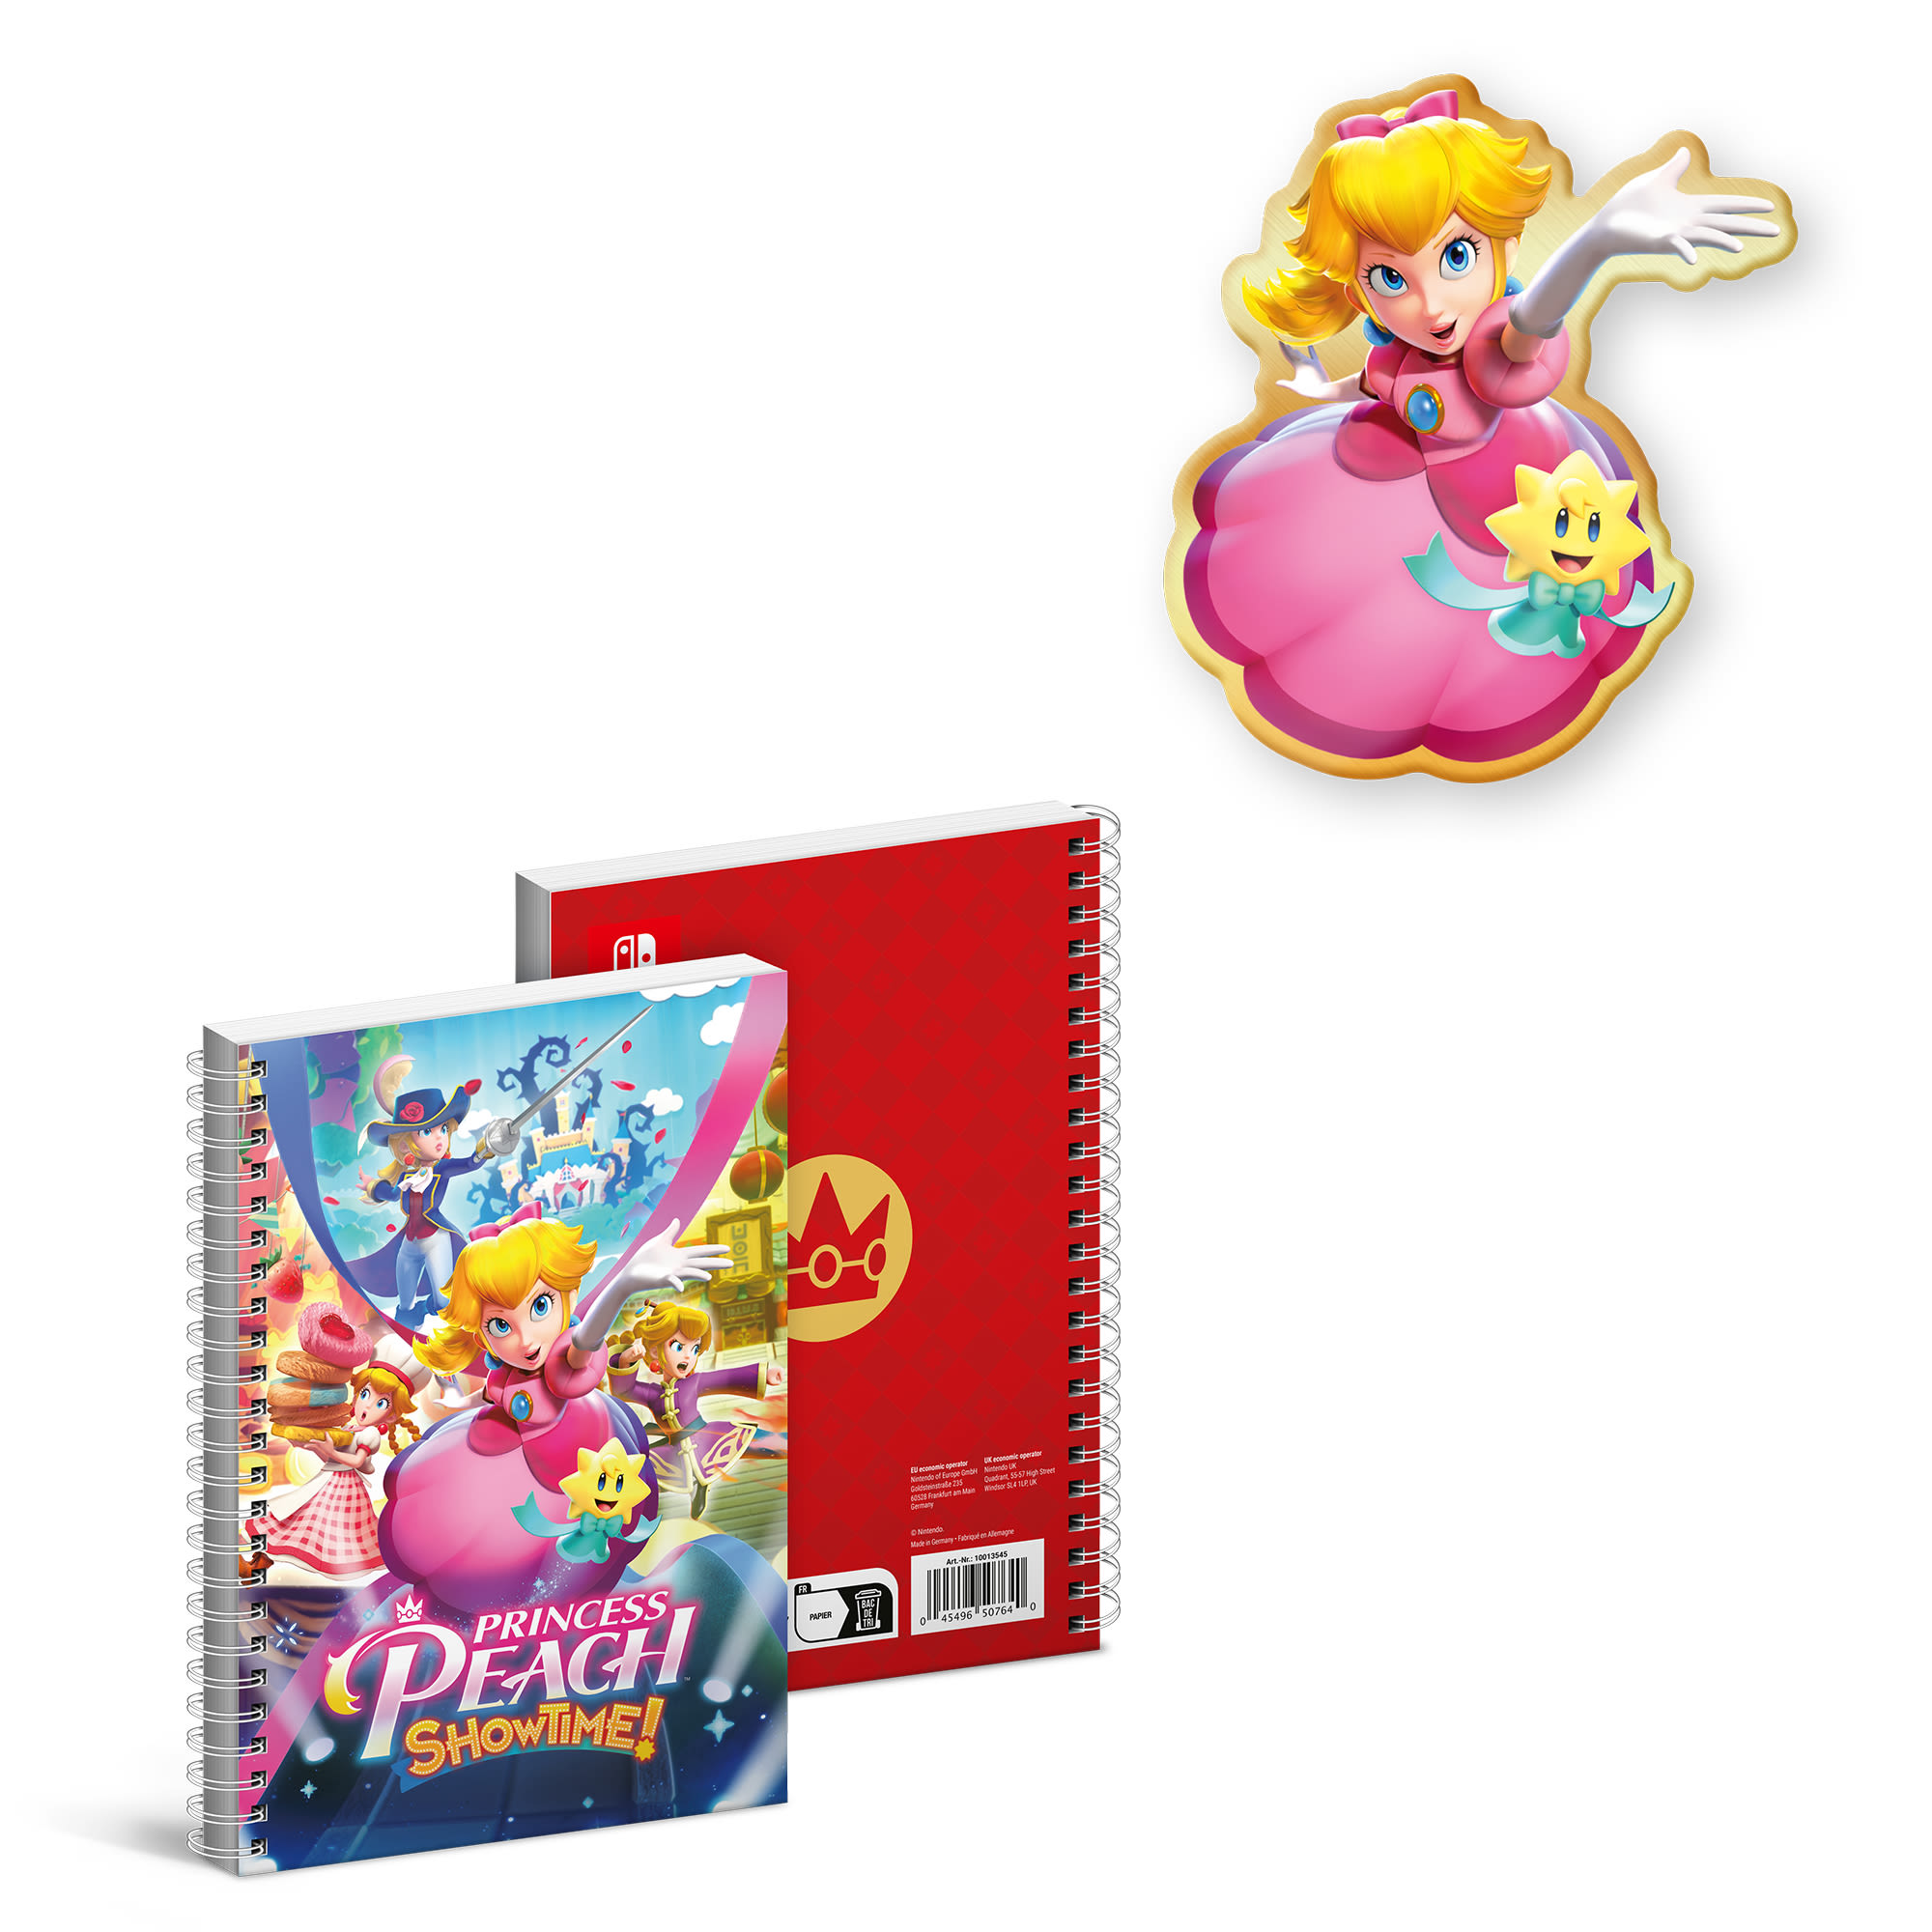 My Nintendo Store UK on X: Save the Sparkle Theatre in Princess Peach:  Showtime! A bundle including the game and the Princess Peach: Showtime!  Shopping Bag is available for £56.99/€67.99. All pre-orders